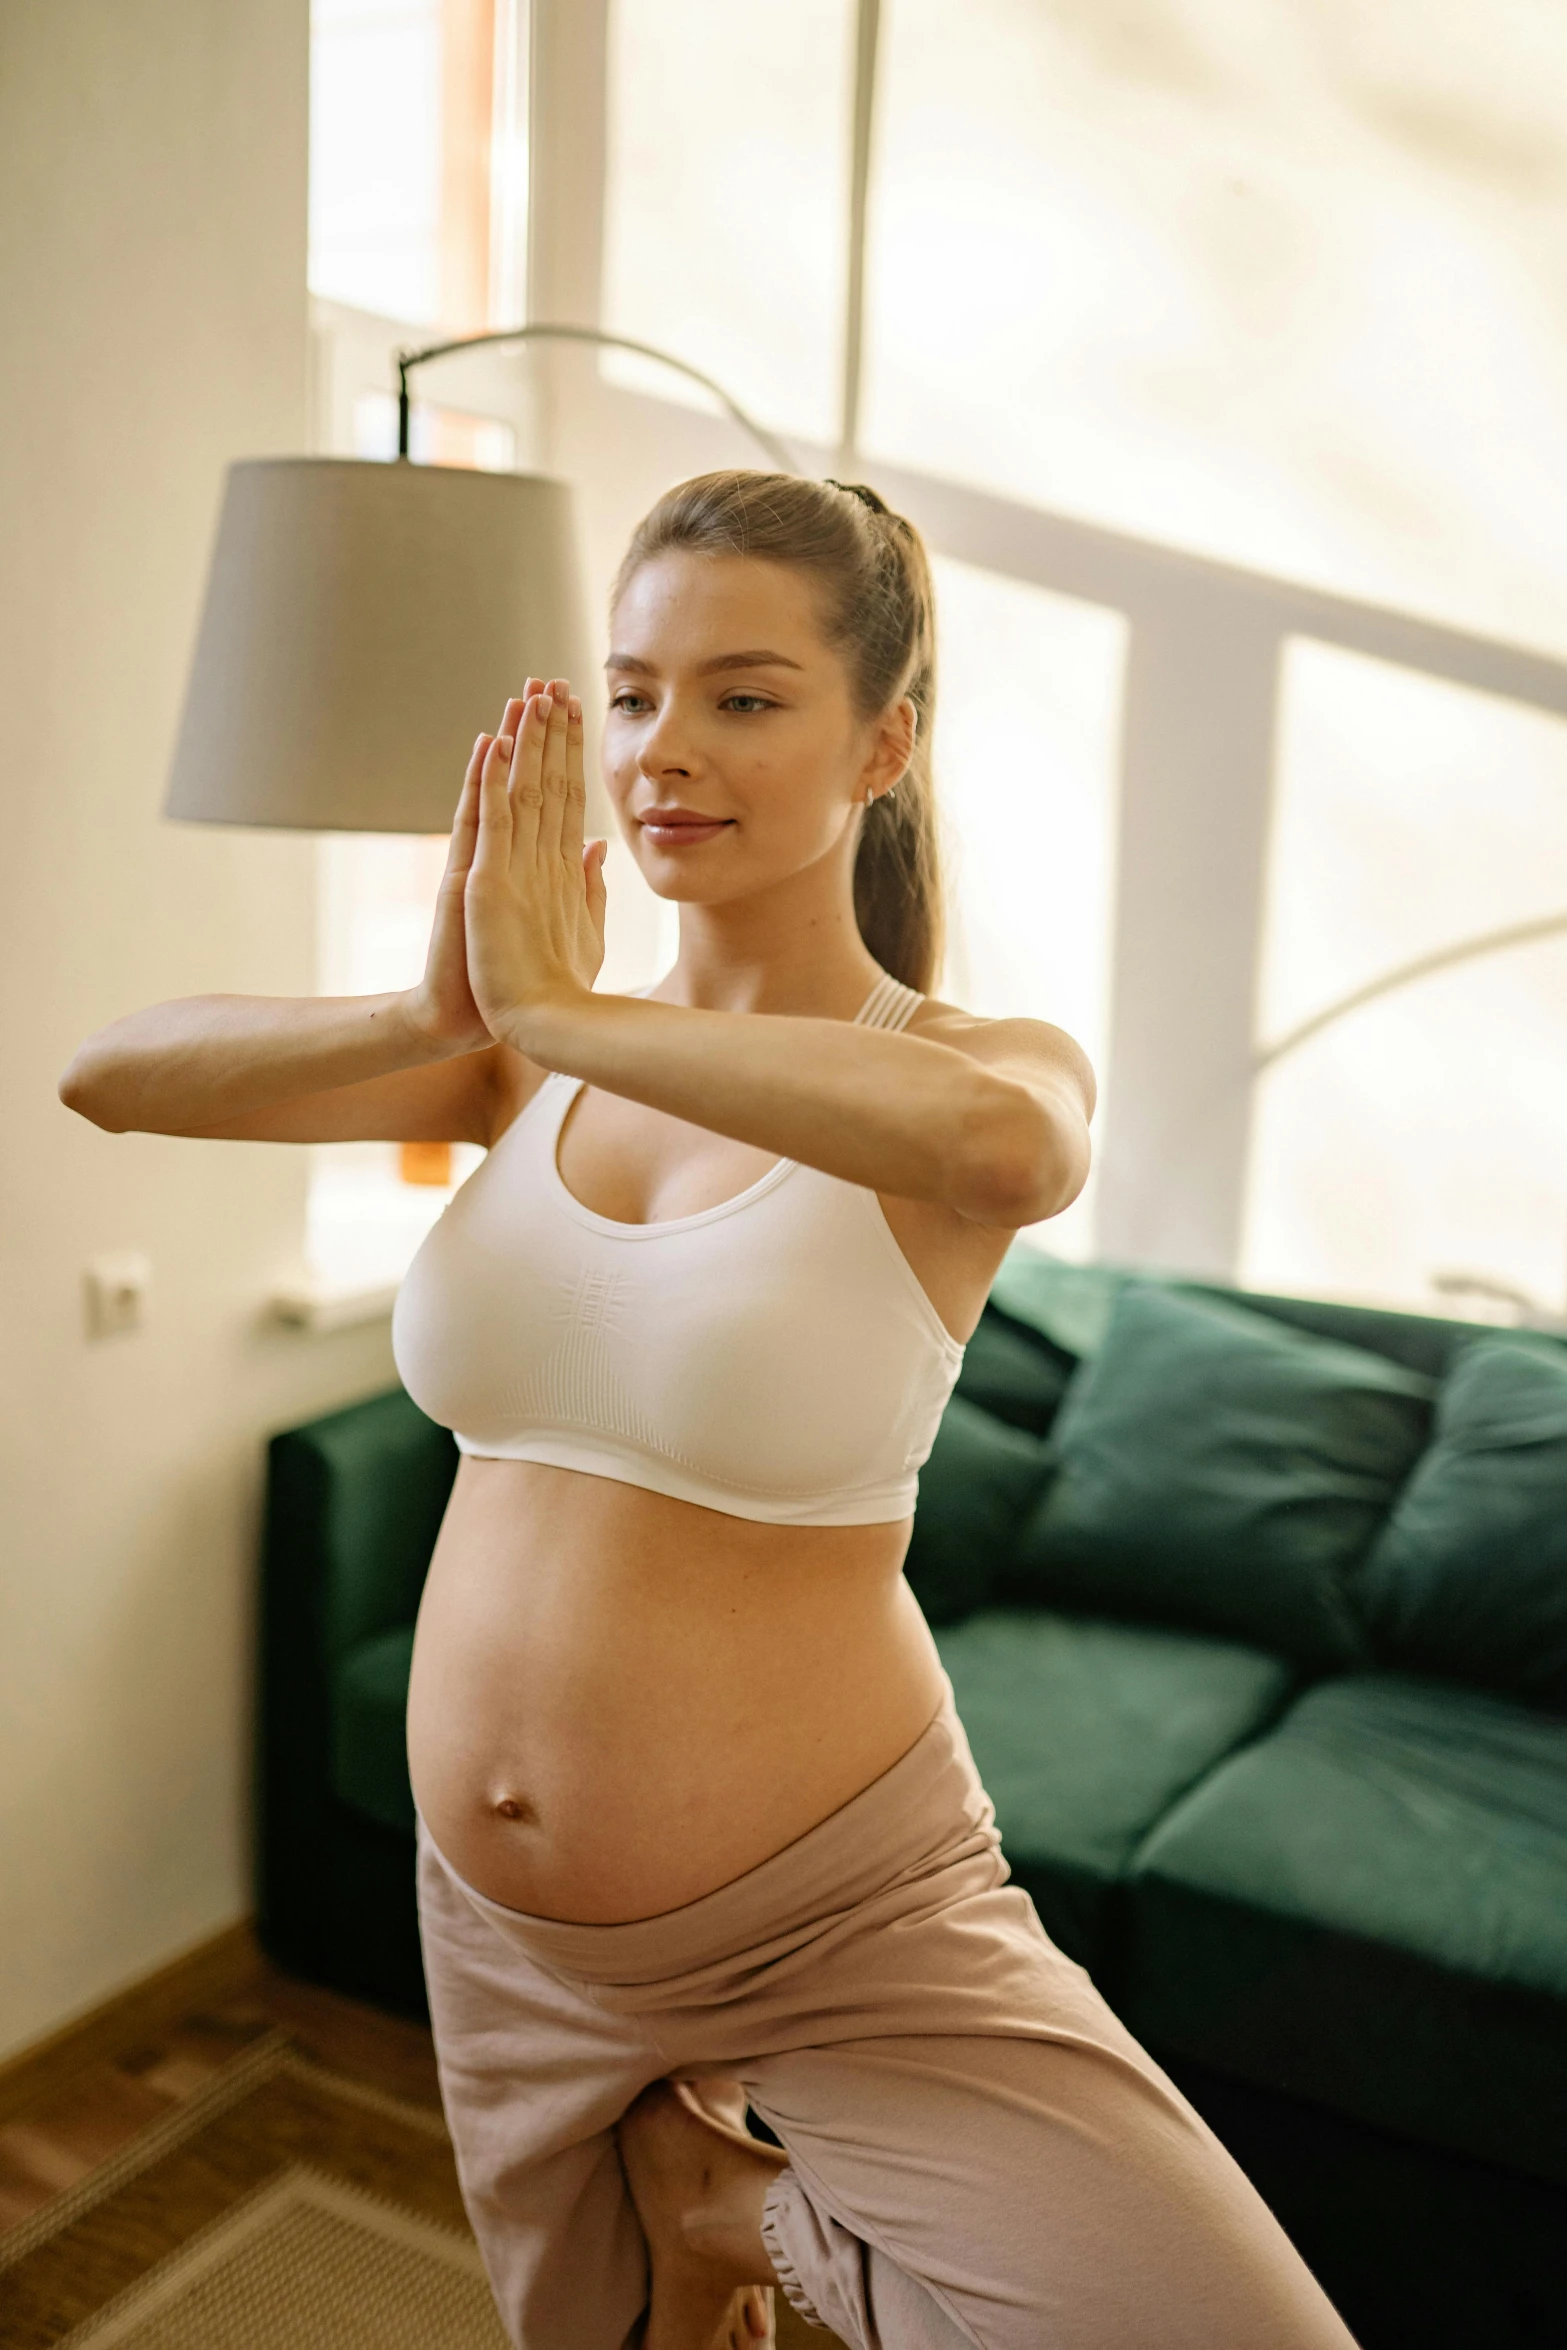 a pregnant woman doing yoga in a living room, by Adam Marczyński, shutterstock, figuration libre, perfect body face and hands, square, raising an arm, lights